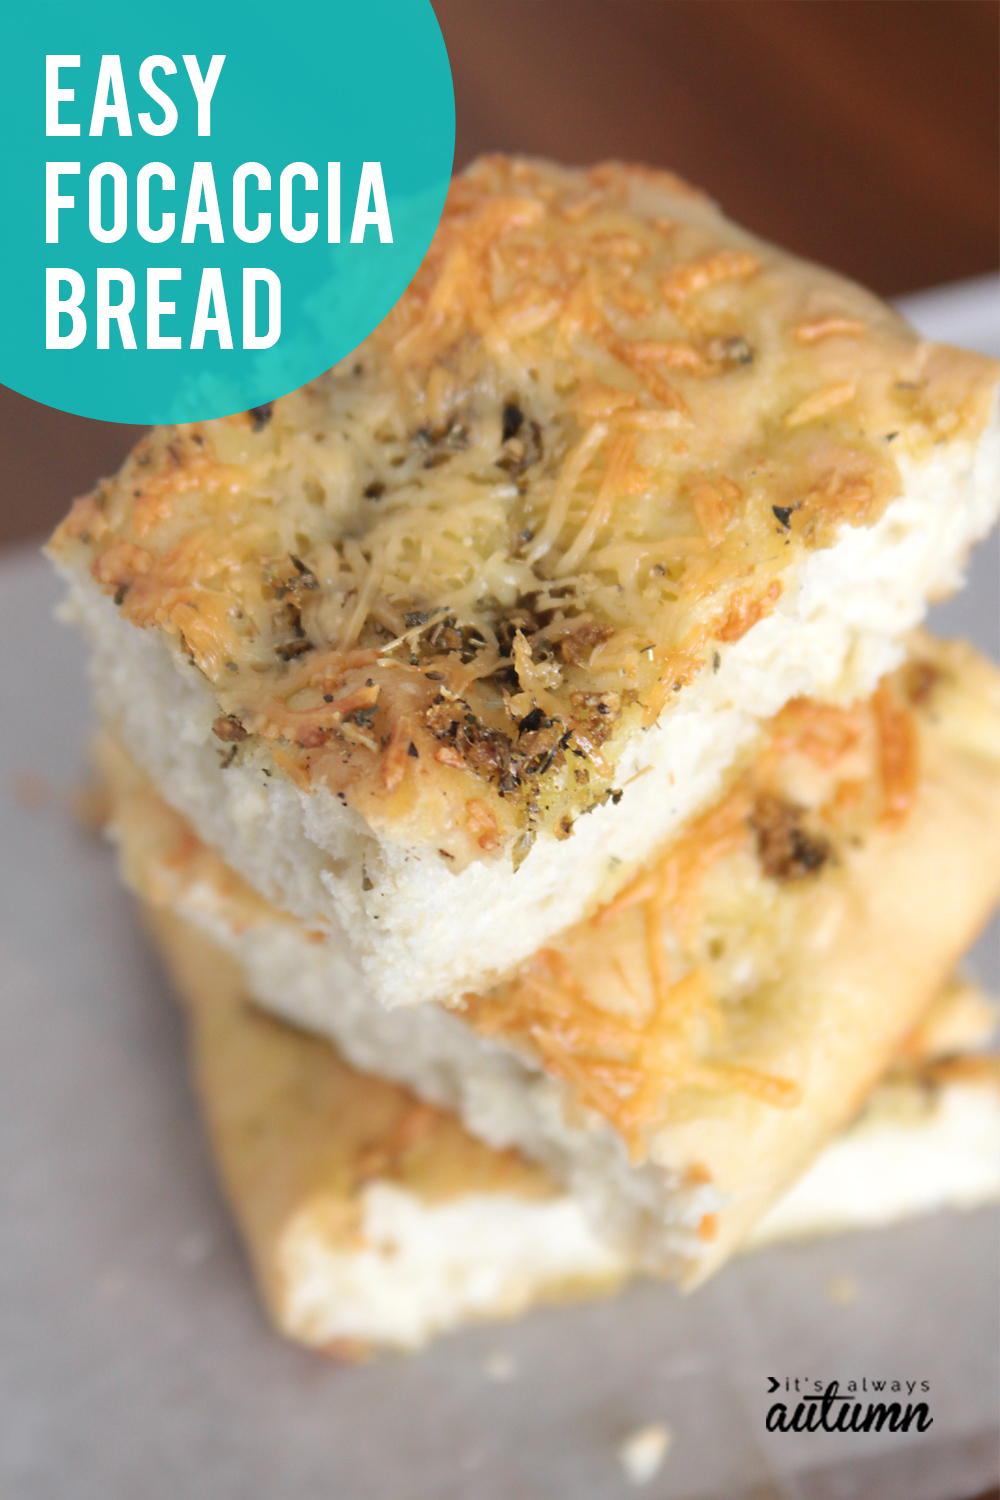 This is the easiest focaccia recipe ever! Start with frozen bread dough for amazing focaccia bread in no time.